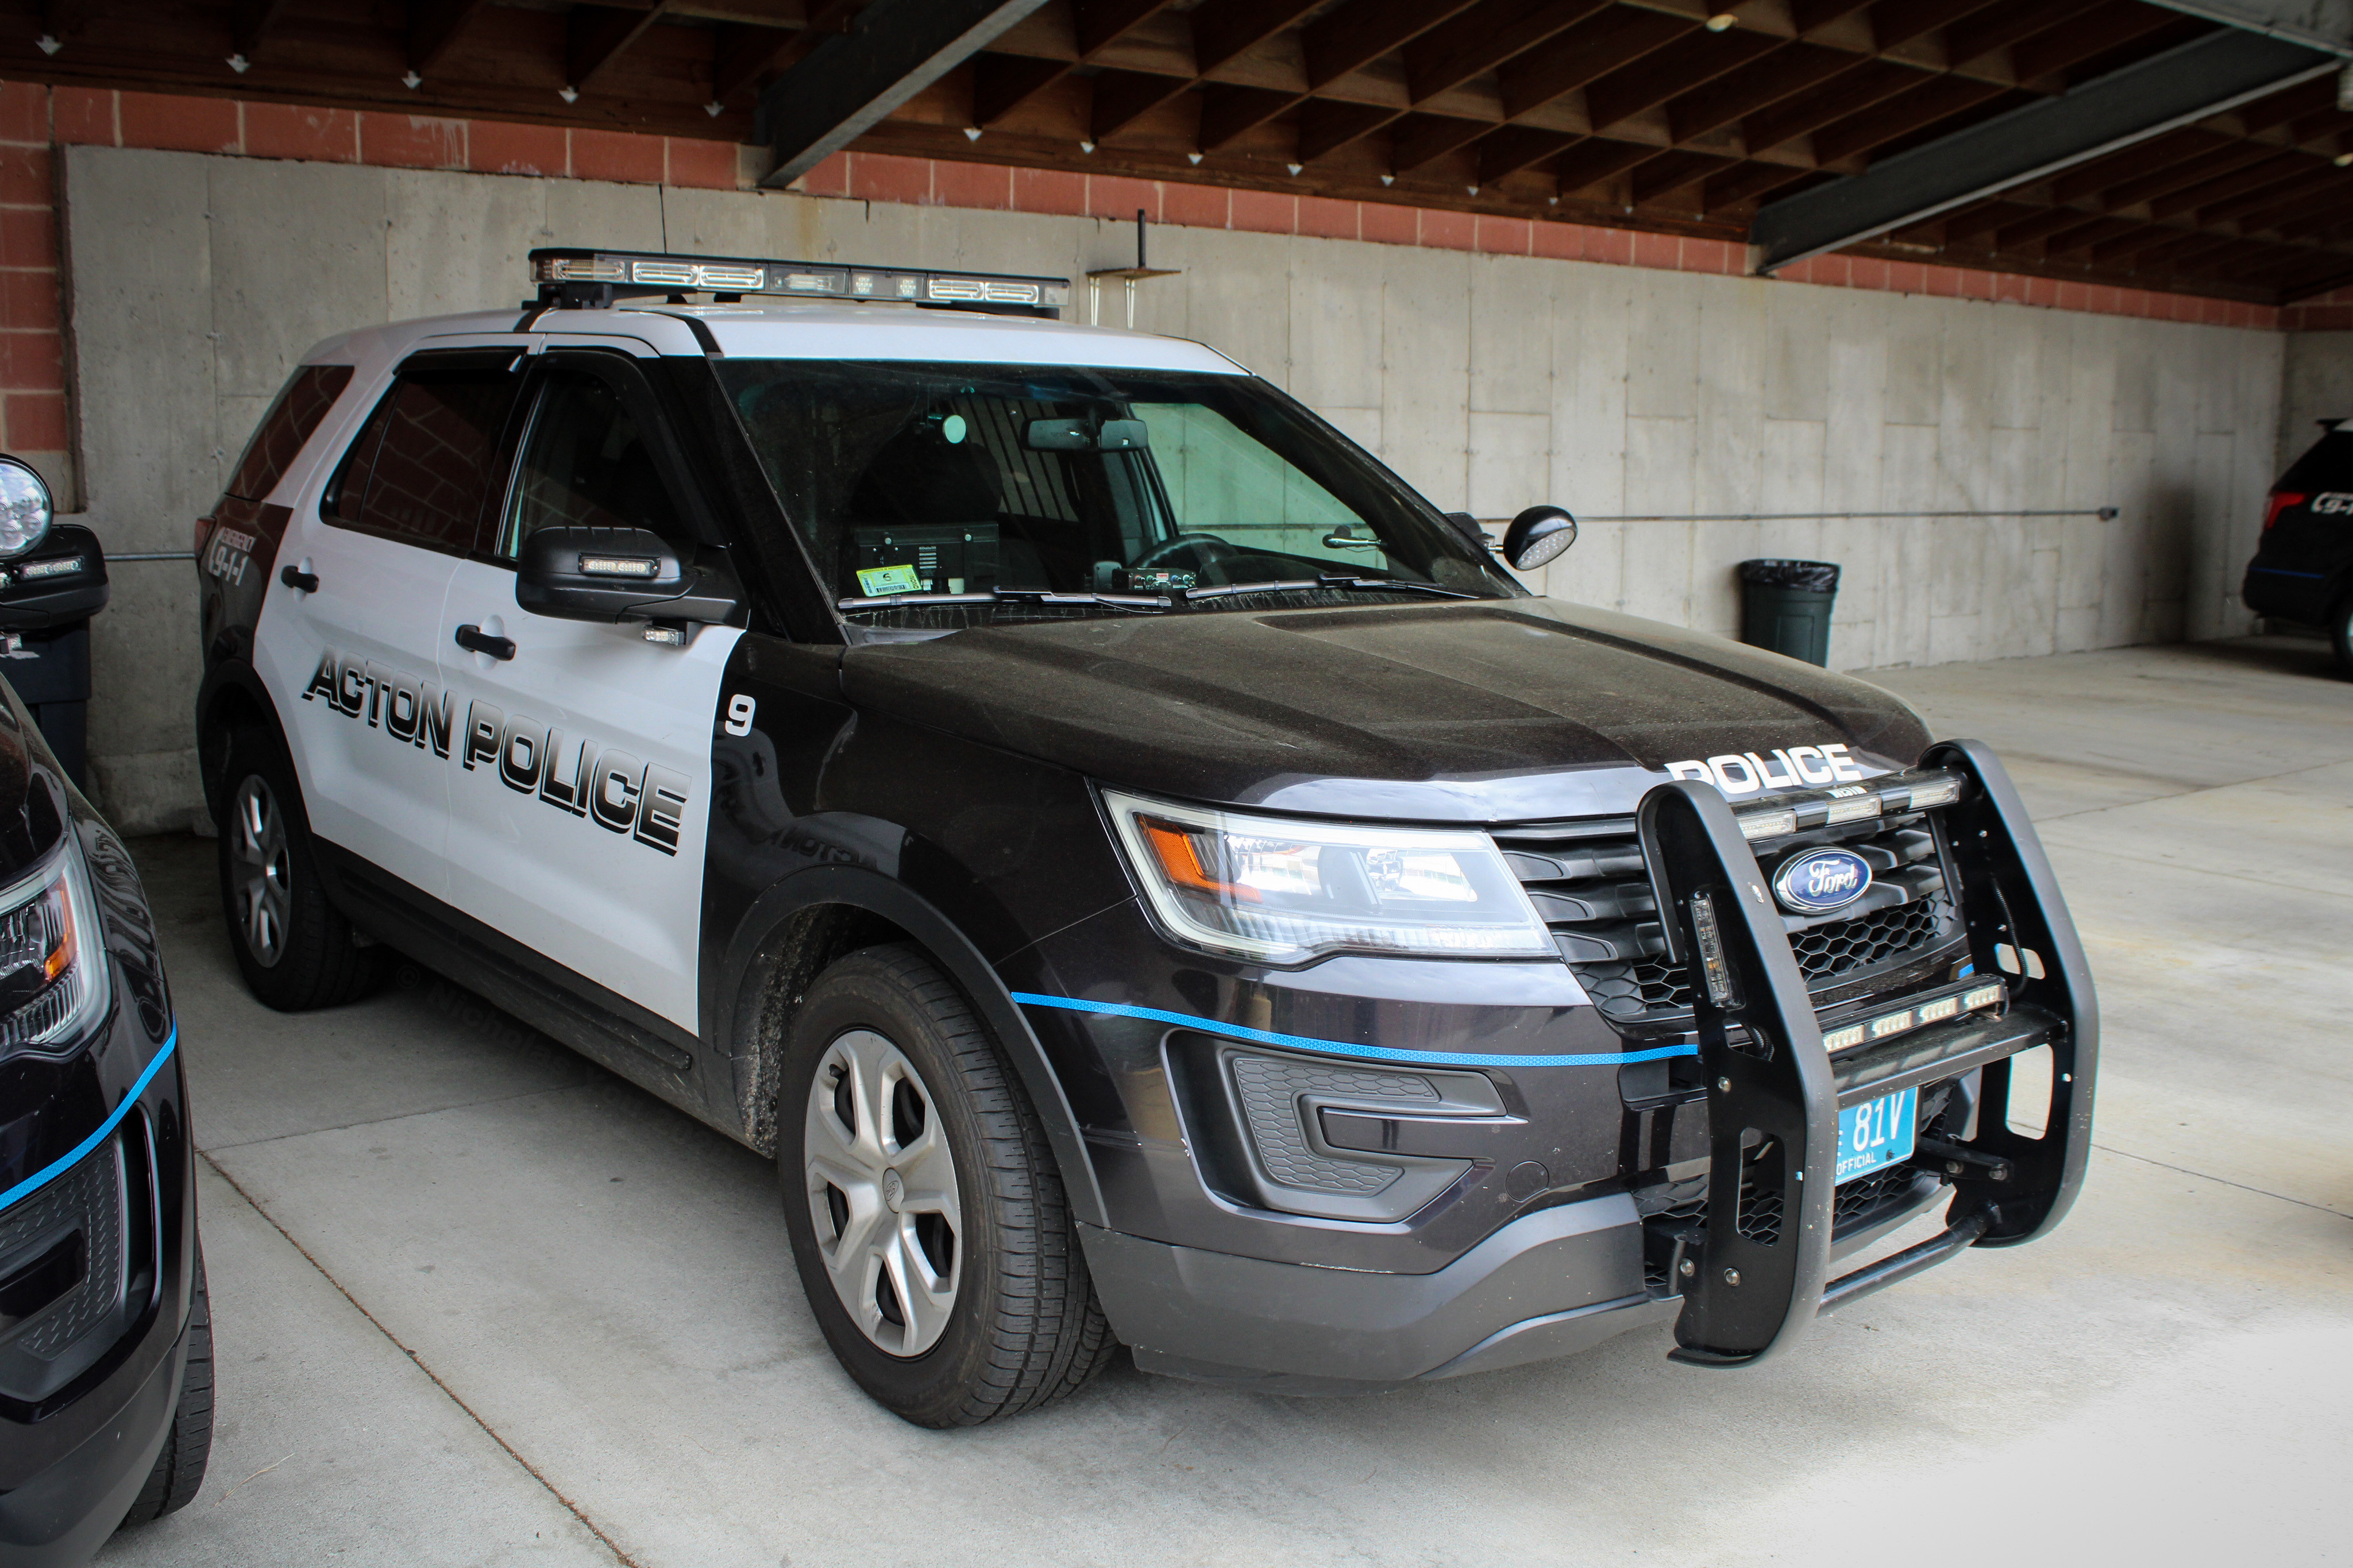 A photo  of Acton Police
            Car 9, a 2016-2019 Ford Police Interceptor Utility             taken by Nicholas You